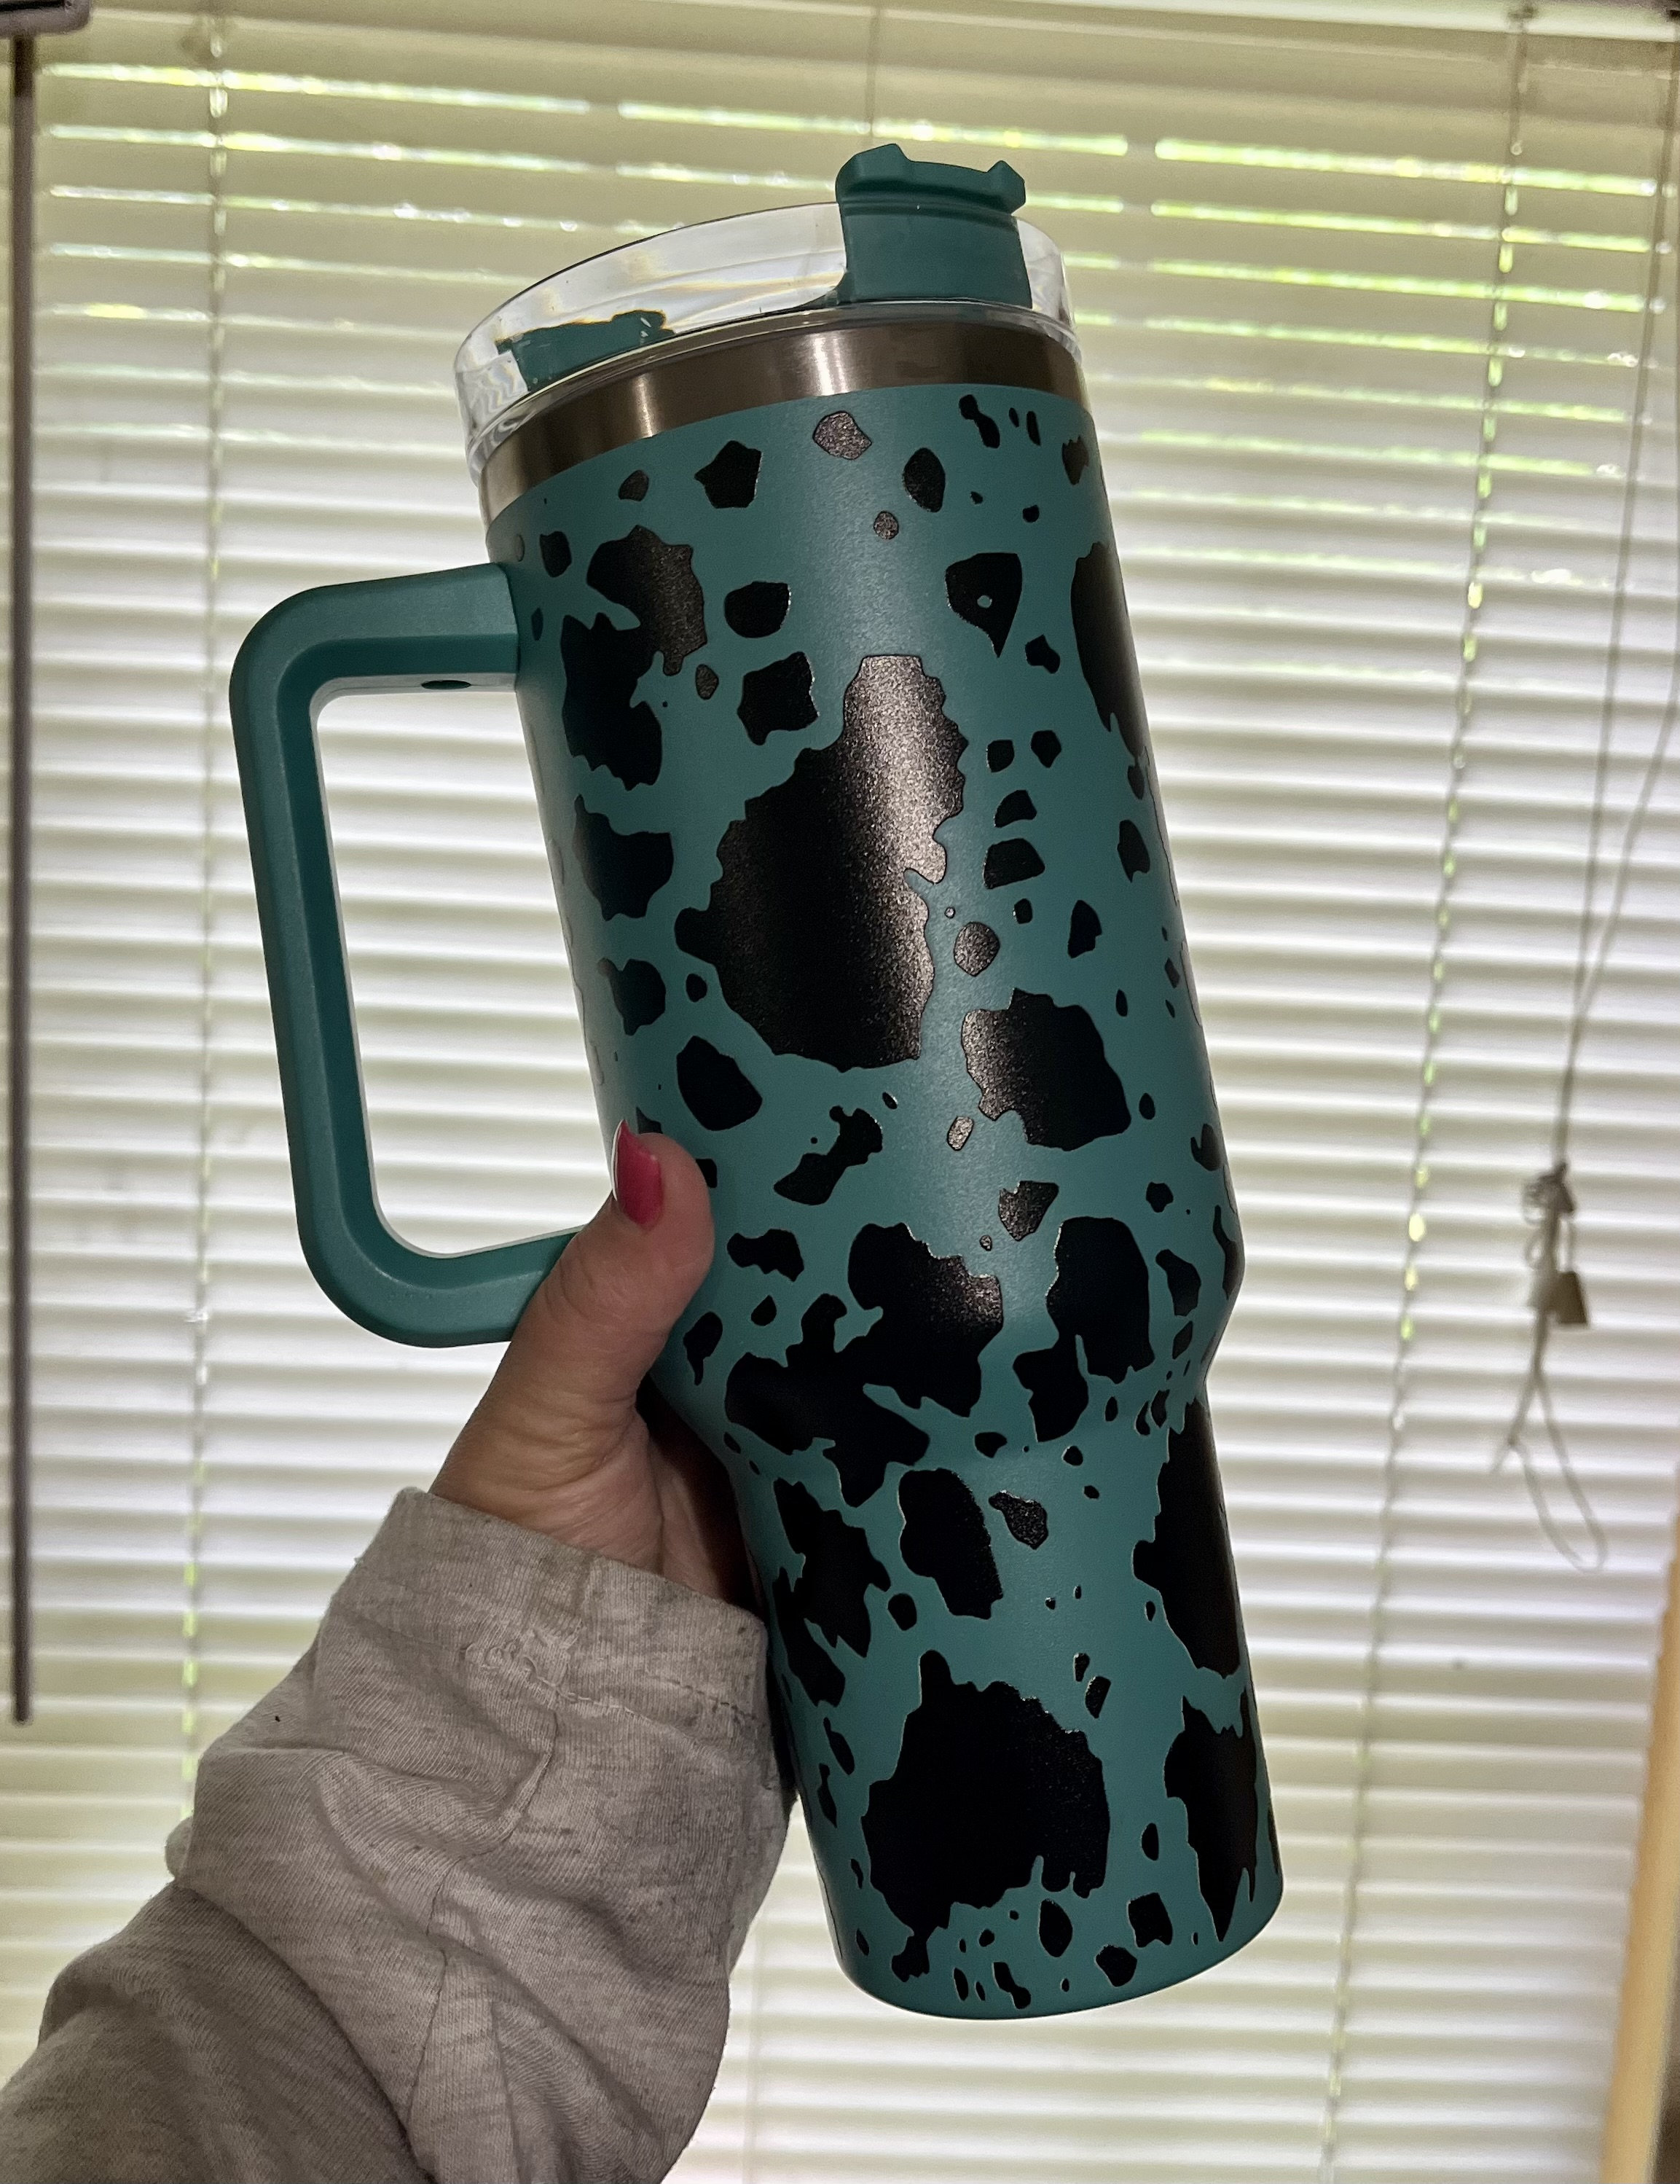 Cow Print Tumbler, 40 Oz Tumbler with Handle and Straw, Cute